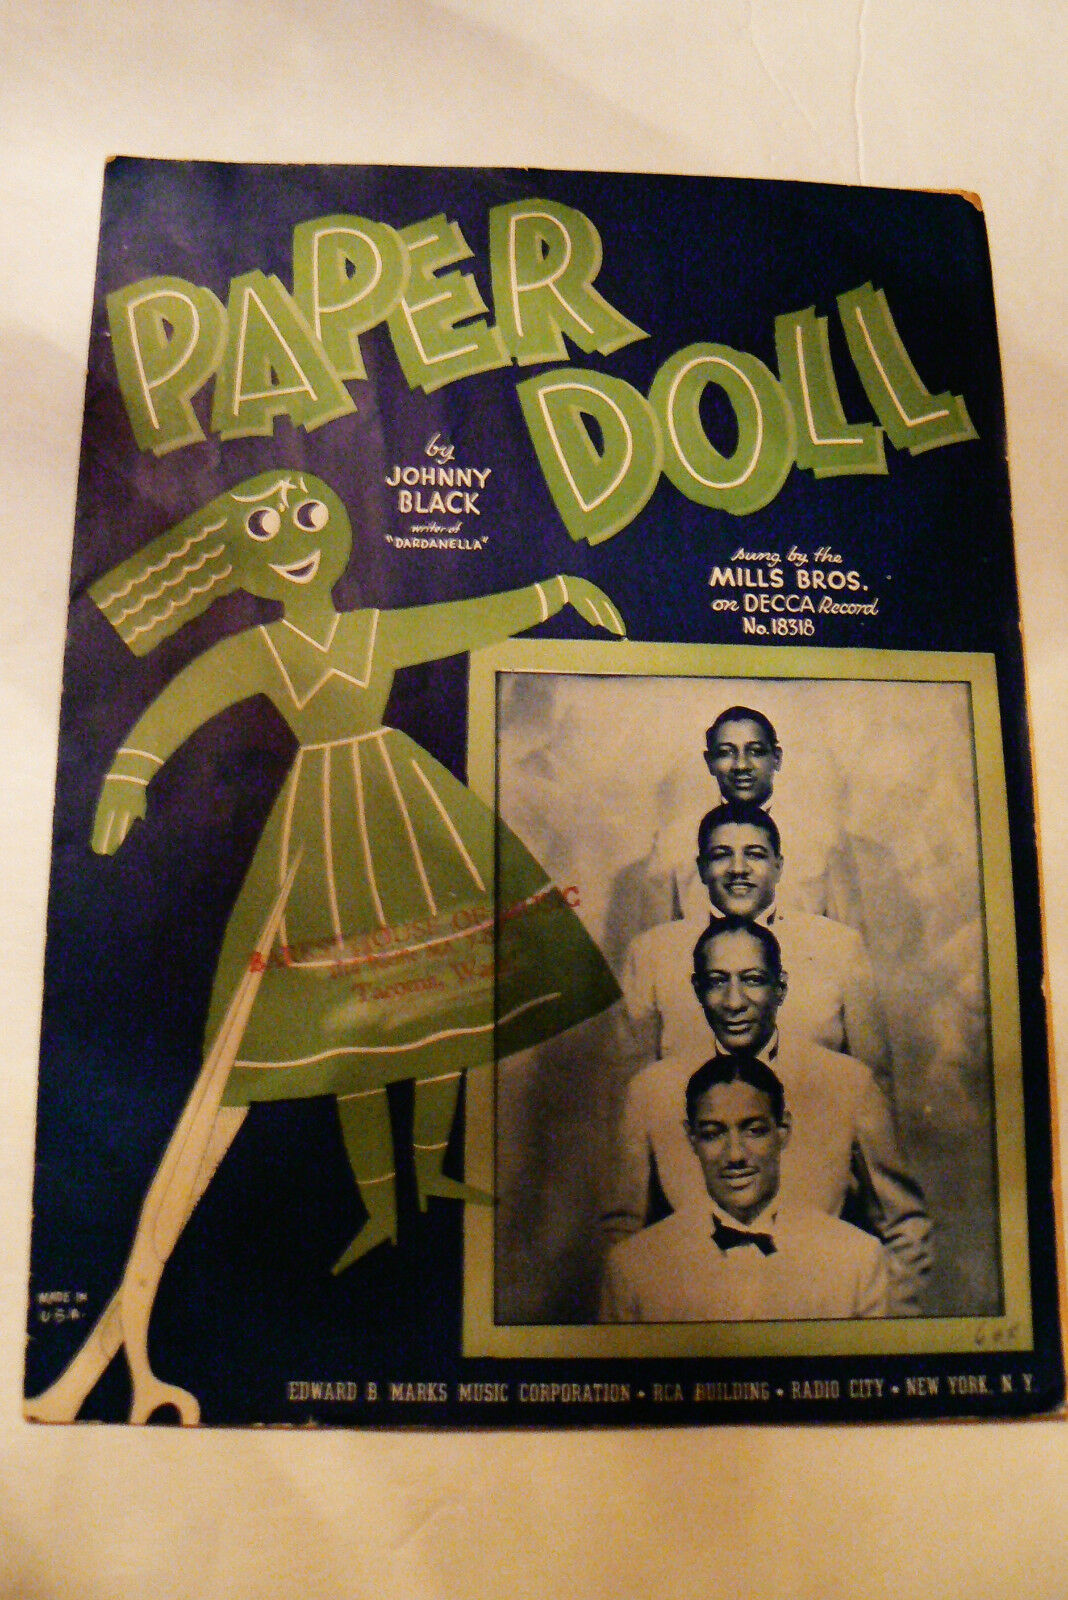 Vtg 1930 Paper Doll By Johny Black Sung By Mills Bros 1943 Sheet Music